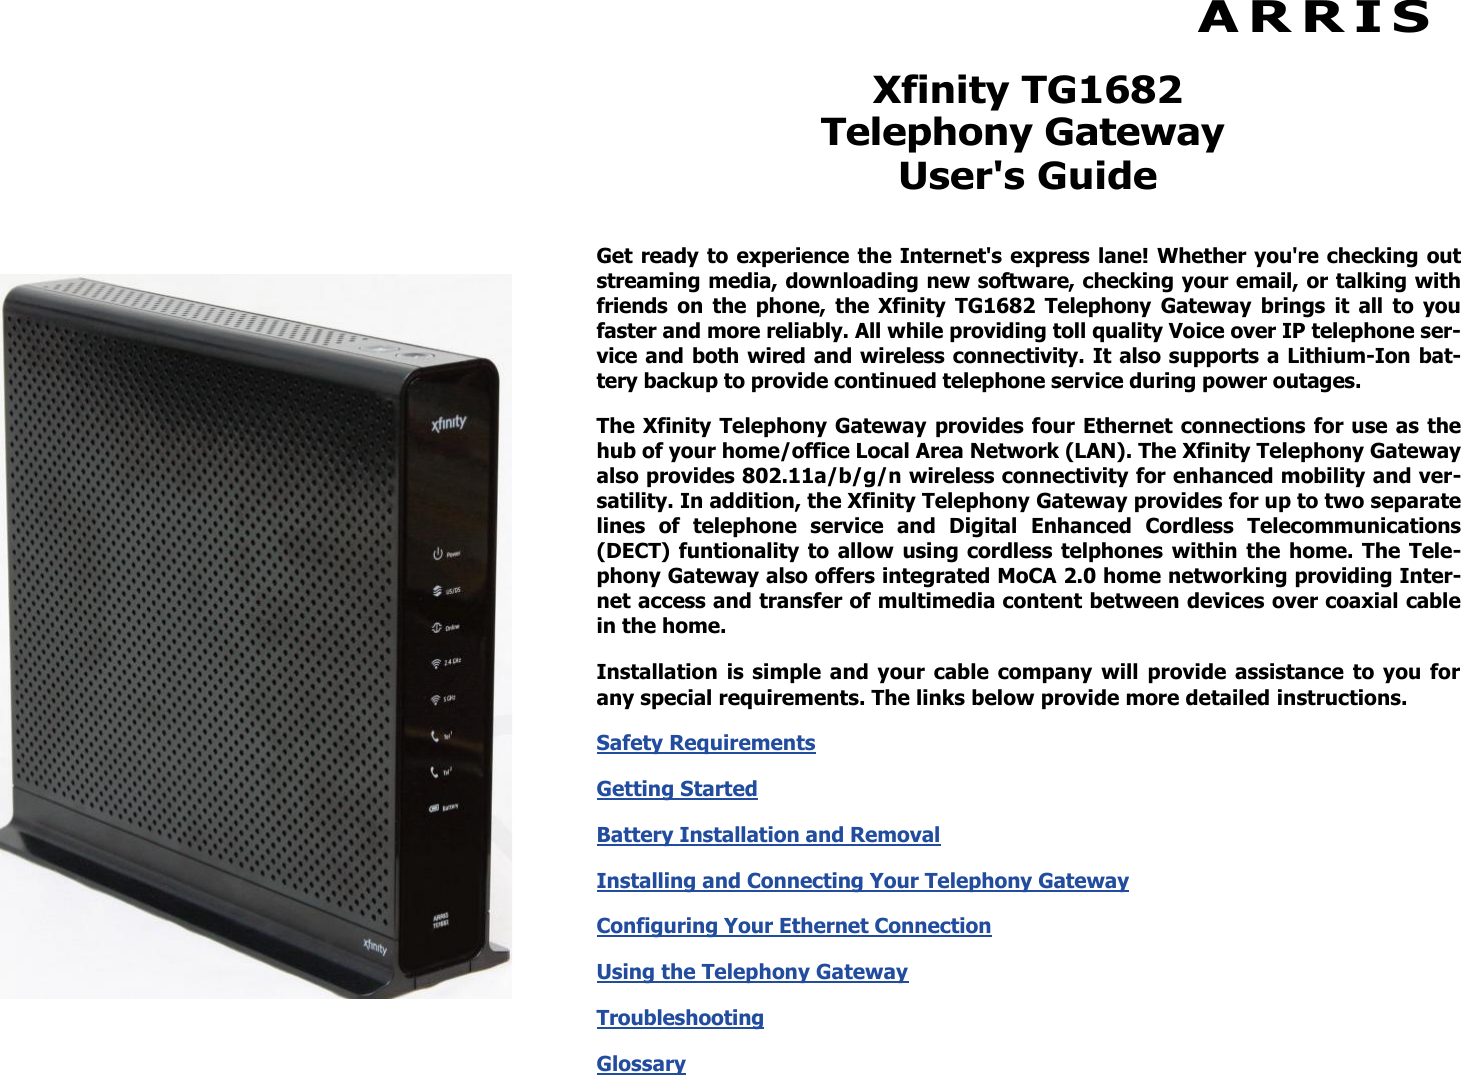  A R R I S  Xfinity TG1682 Telephony Gateway User&apos;s Guide Get ready to experience the Internet&apos;s express lane! Whether you&apos;re checking out streaming media, downloading new software, checking your email, or talking with friends  on  the  phone,  the  Xfinity  TG1682  Telephony  Gateway  brings  it  all  to  you faster and more reliably. All while providing toll quality Voice over IP telephone ser-vice and both wired and wireless connectivity. It also supports a Lithium-Ion bat-tery backup to provide continued telephone service during power outages. The Xfinity Telephony Gateway provides four Ethernet connections for use as the hub of your home/office Local Area Network (LAN). The Xfinity Telephony Gateway also provides 802.11a/b/g/n wireless connectivity for enhanced mobility and ver-satility. In addition, the Xfinity Telephony Gateway provides for up to two separate lines  of  telephone  service  and  Digital  Enhanced  Cordless  Telecommunications (DECT) funtionality to  allow  using cordless  telphones within the home. The Tele-phony Gateway also offers integrated MoCA 2.0 home networking providing Inter-net access and transfer of multimedia content between devices over coaxial cable in the home. Installation  is simple  and  your  cable  company  will  provide  assistance  to  you  for any special requirements. The links below provide more detailed instructions. Safety Requirements  Getting Started  Battery Installation and Removal  Installing and Connecting Your Telephony Gateway Configuring Your Ethernet Connection  Using the Telephony Gateway  Troubleshooting  Glossary  